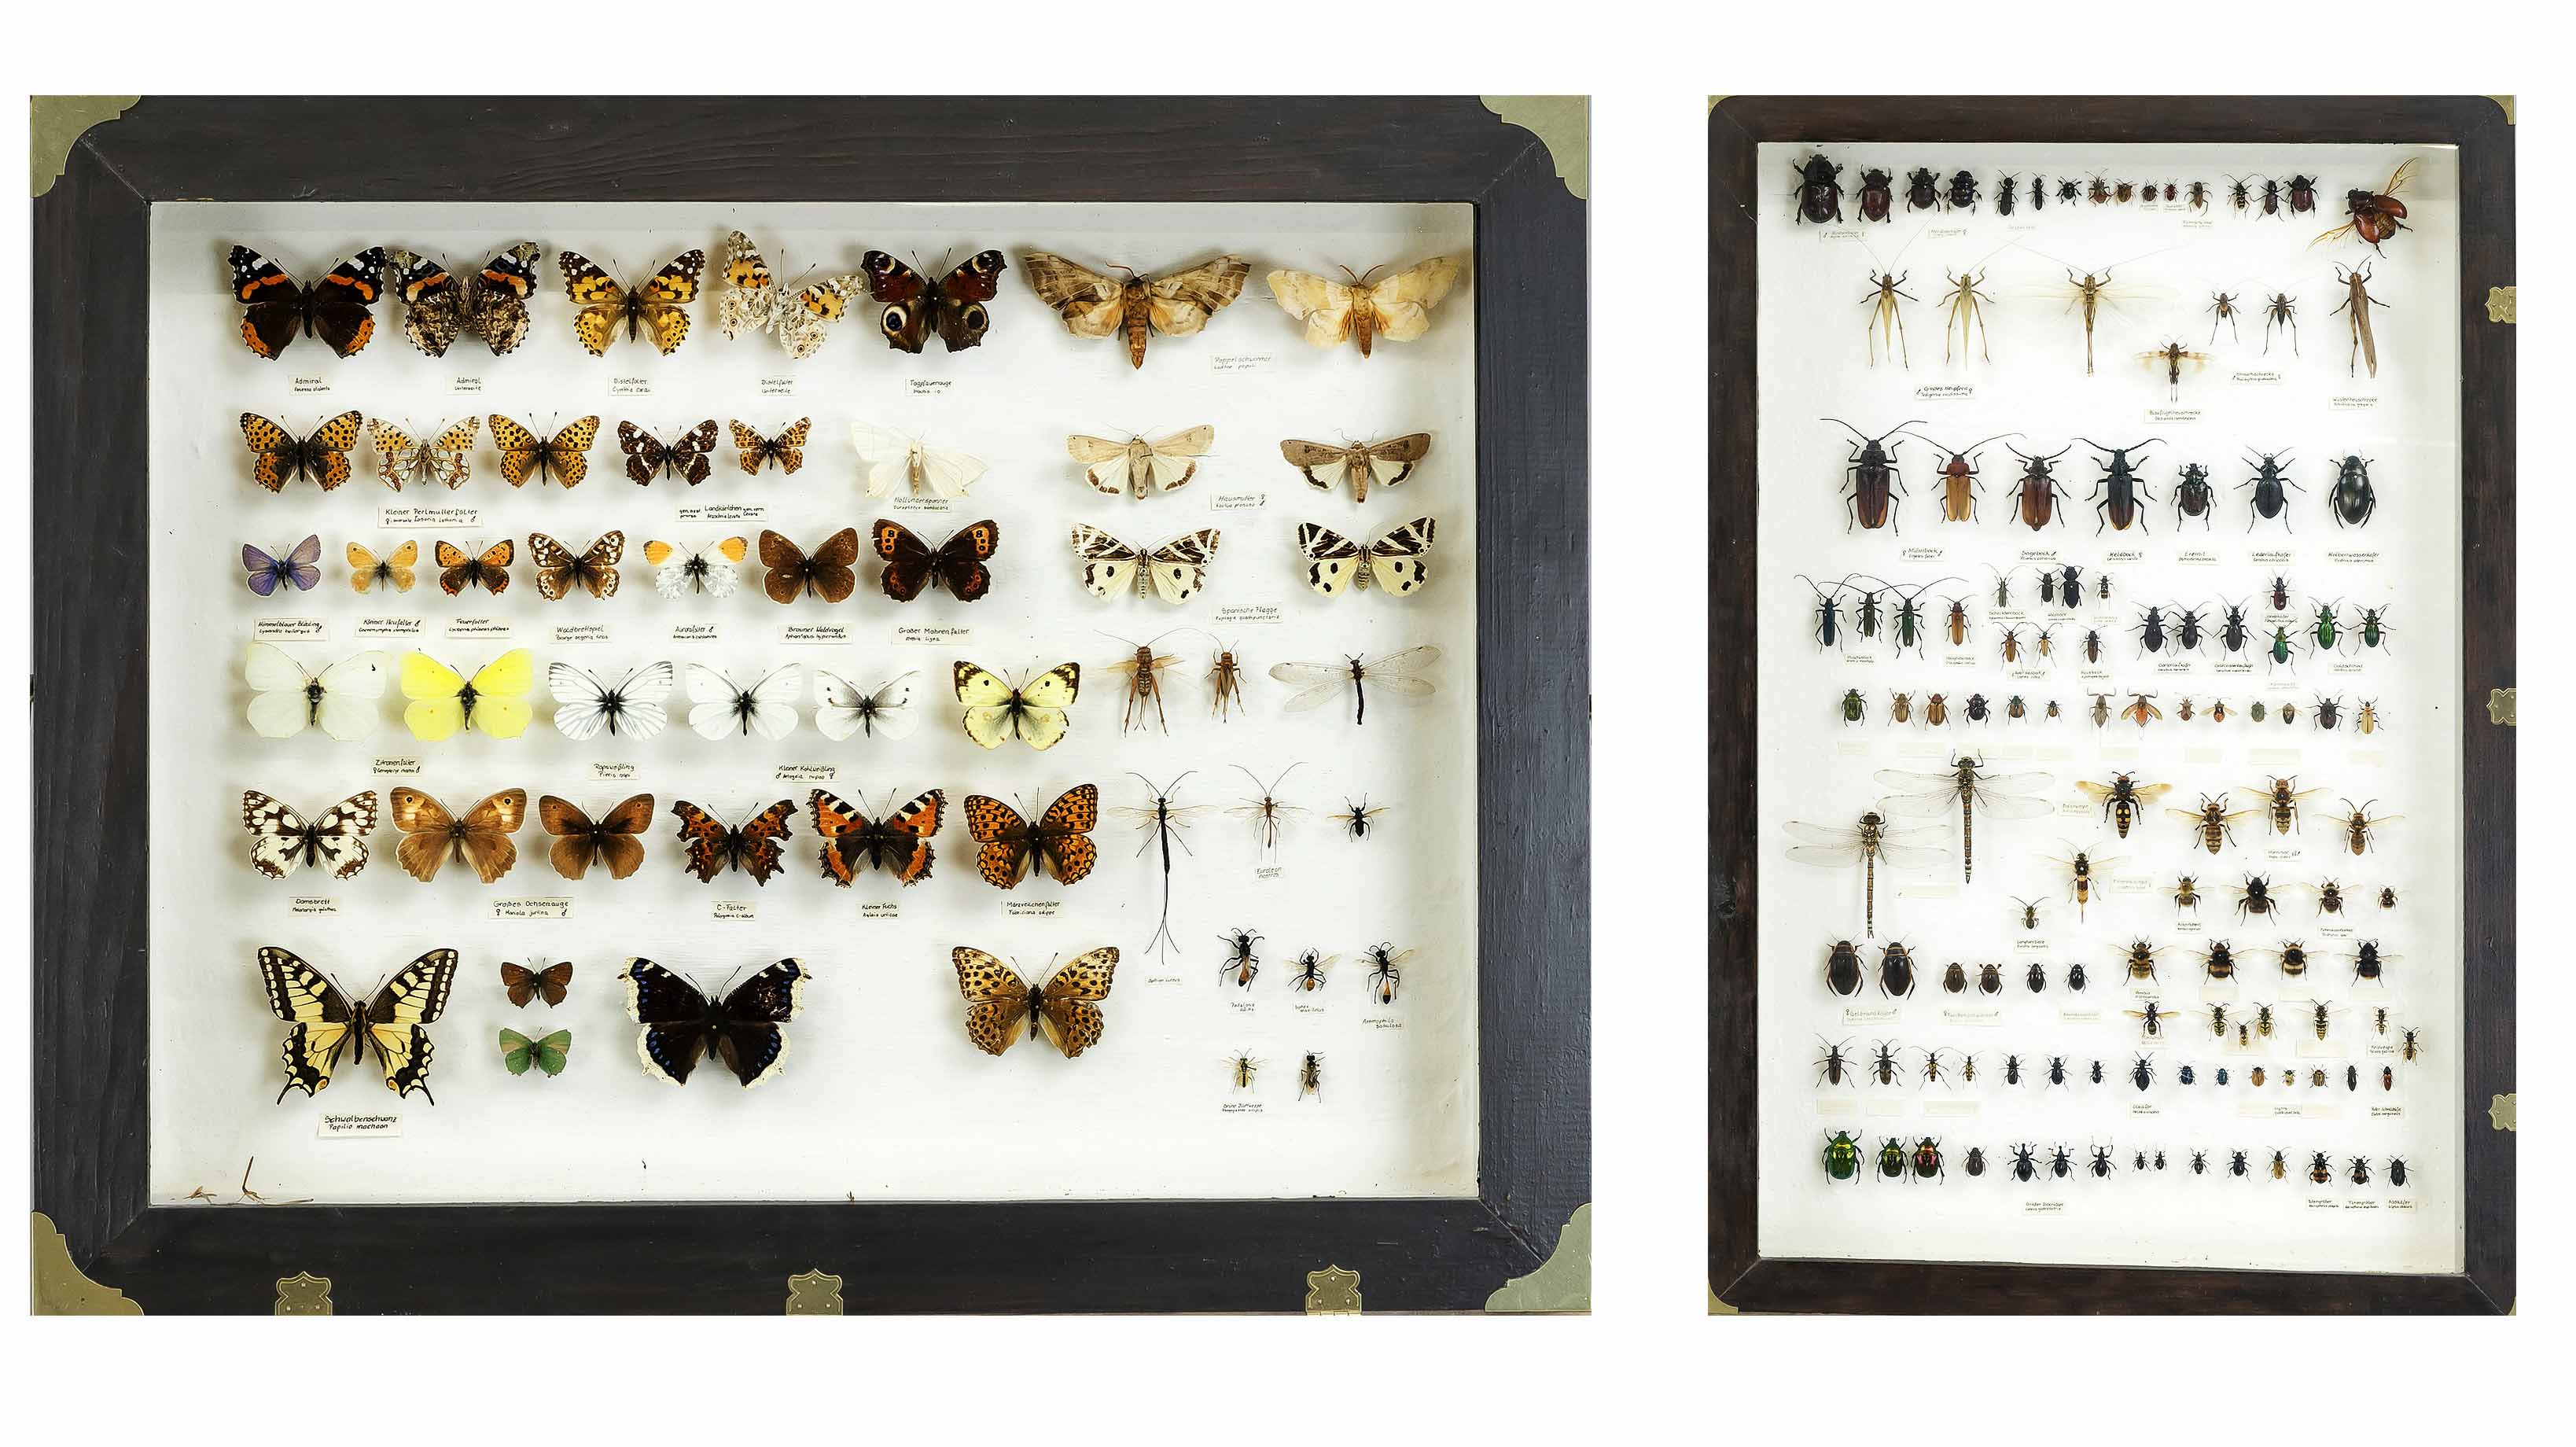 2 display cases/showcases with insects, older collection. In good condition, fitted and labeled with